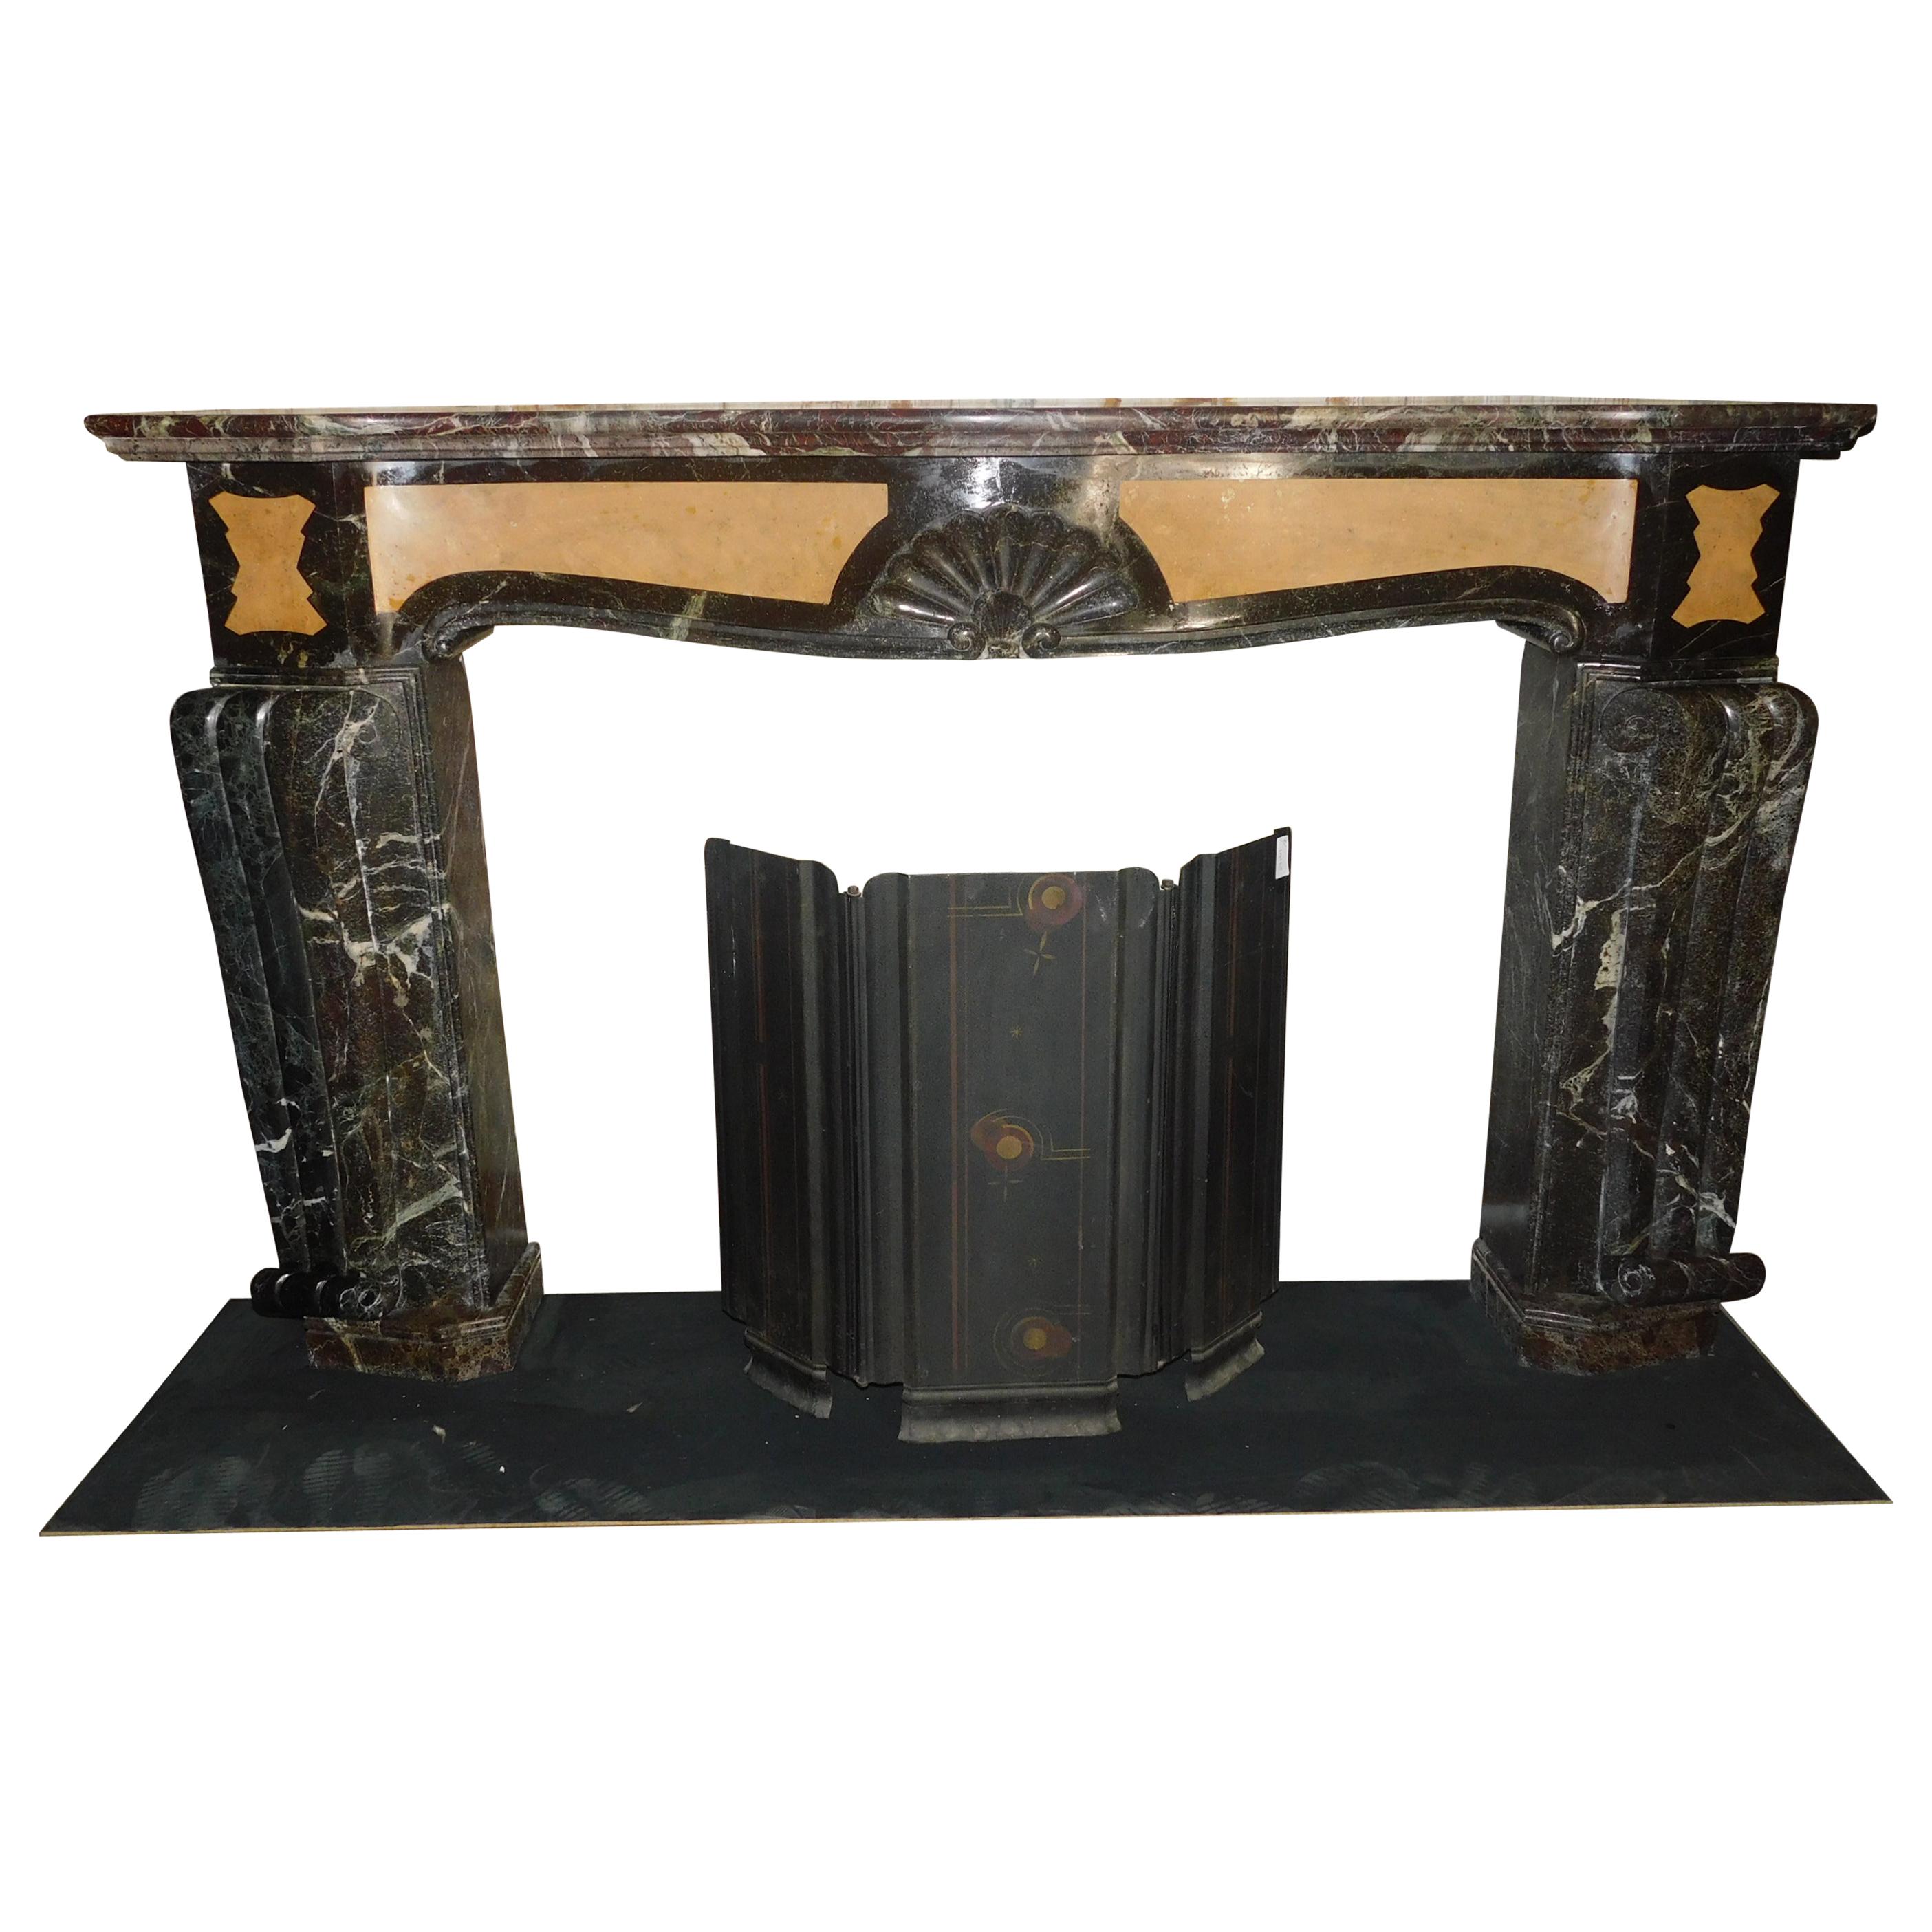 Antique Deco Fireplace, Inlaid Red and Yellow Marble, Rough, Early 1900, Italy